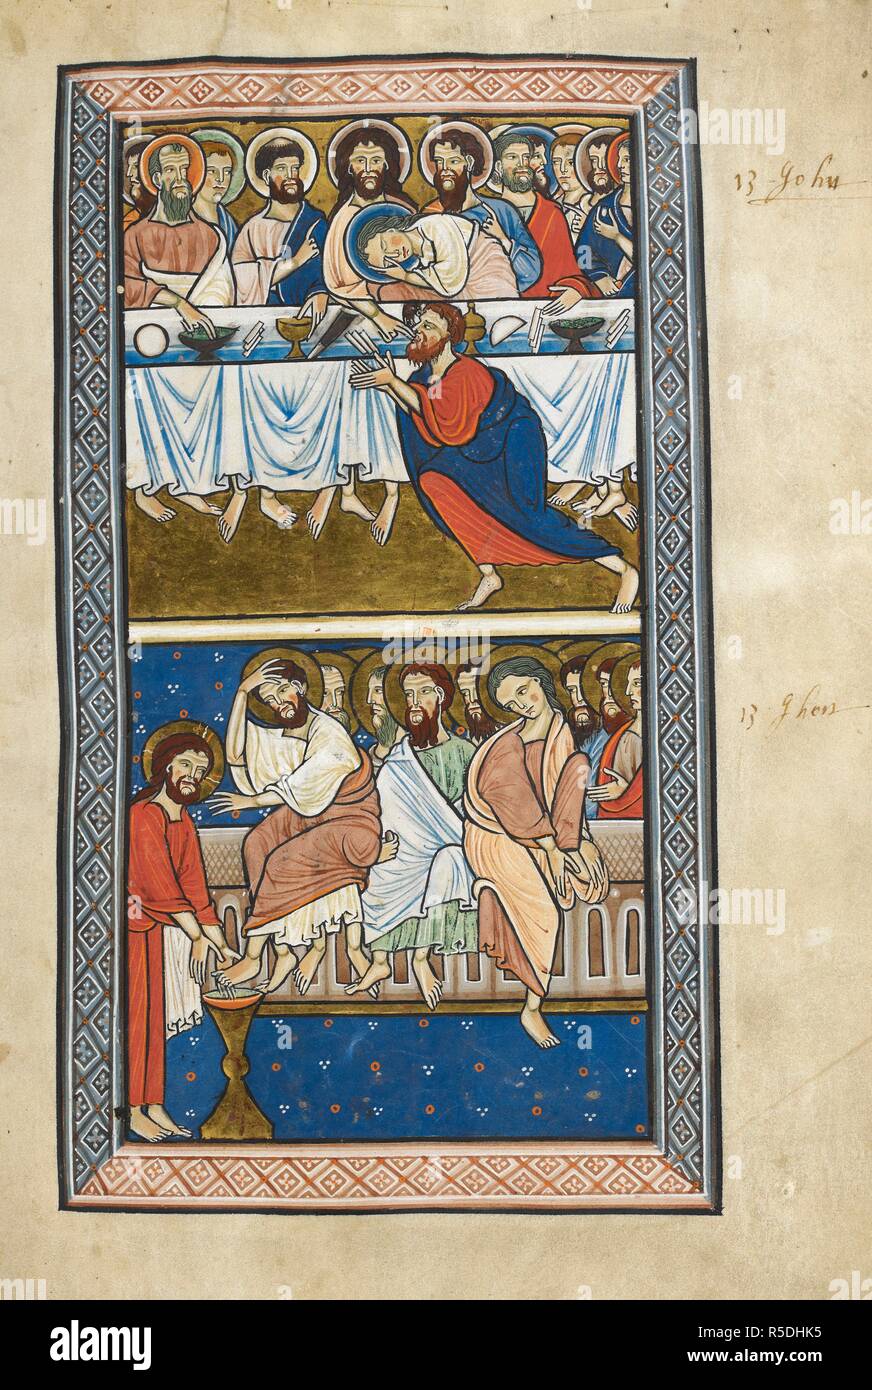 Above, the Last Supper; below, Christ washes the feet of the disciples. Psalter. England (Oxford?), circa 1210. Source: Royal 1 D. X, f.5. Language: Latin. Stock Photo